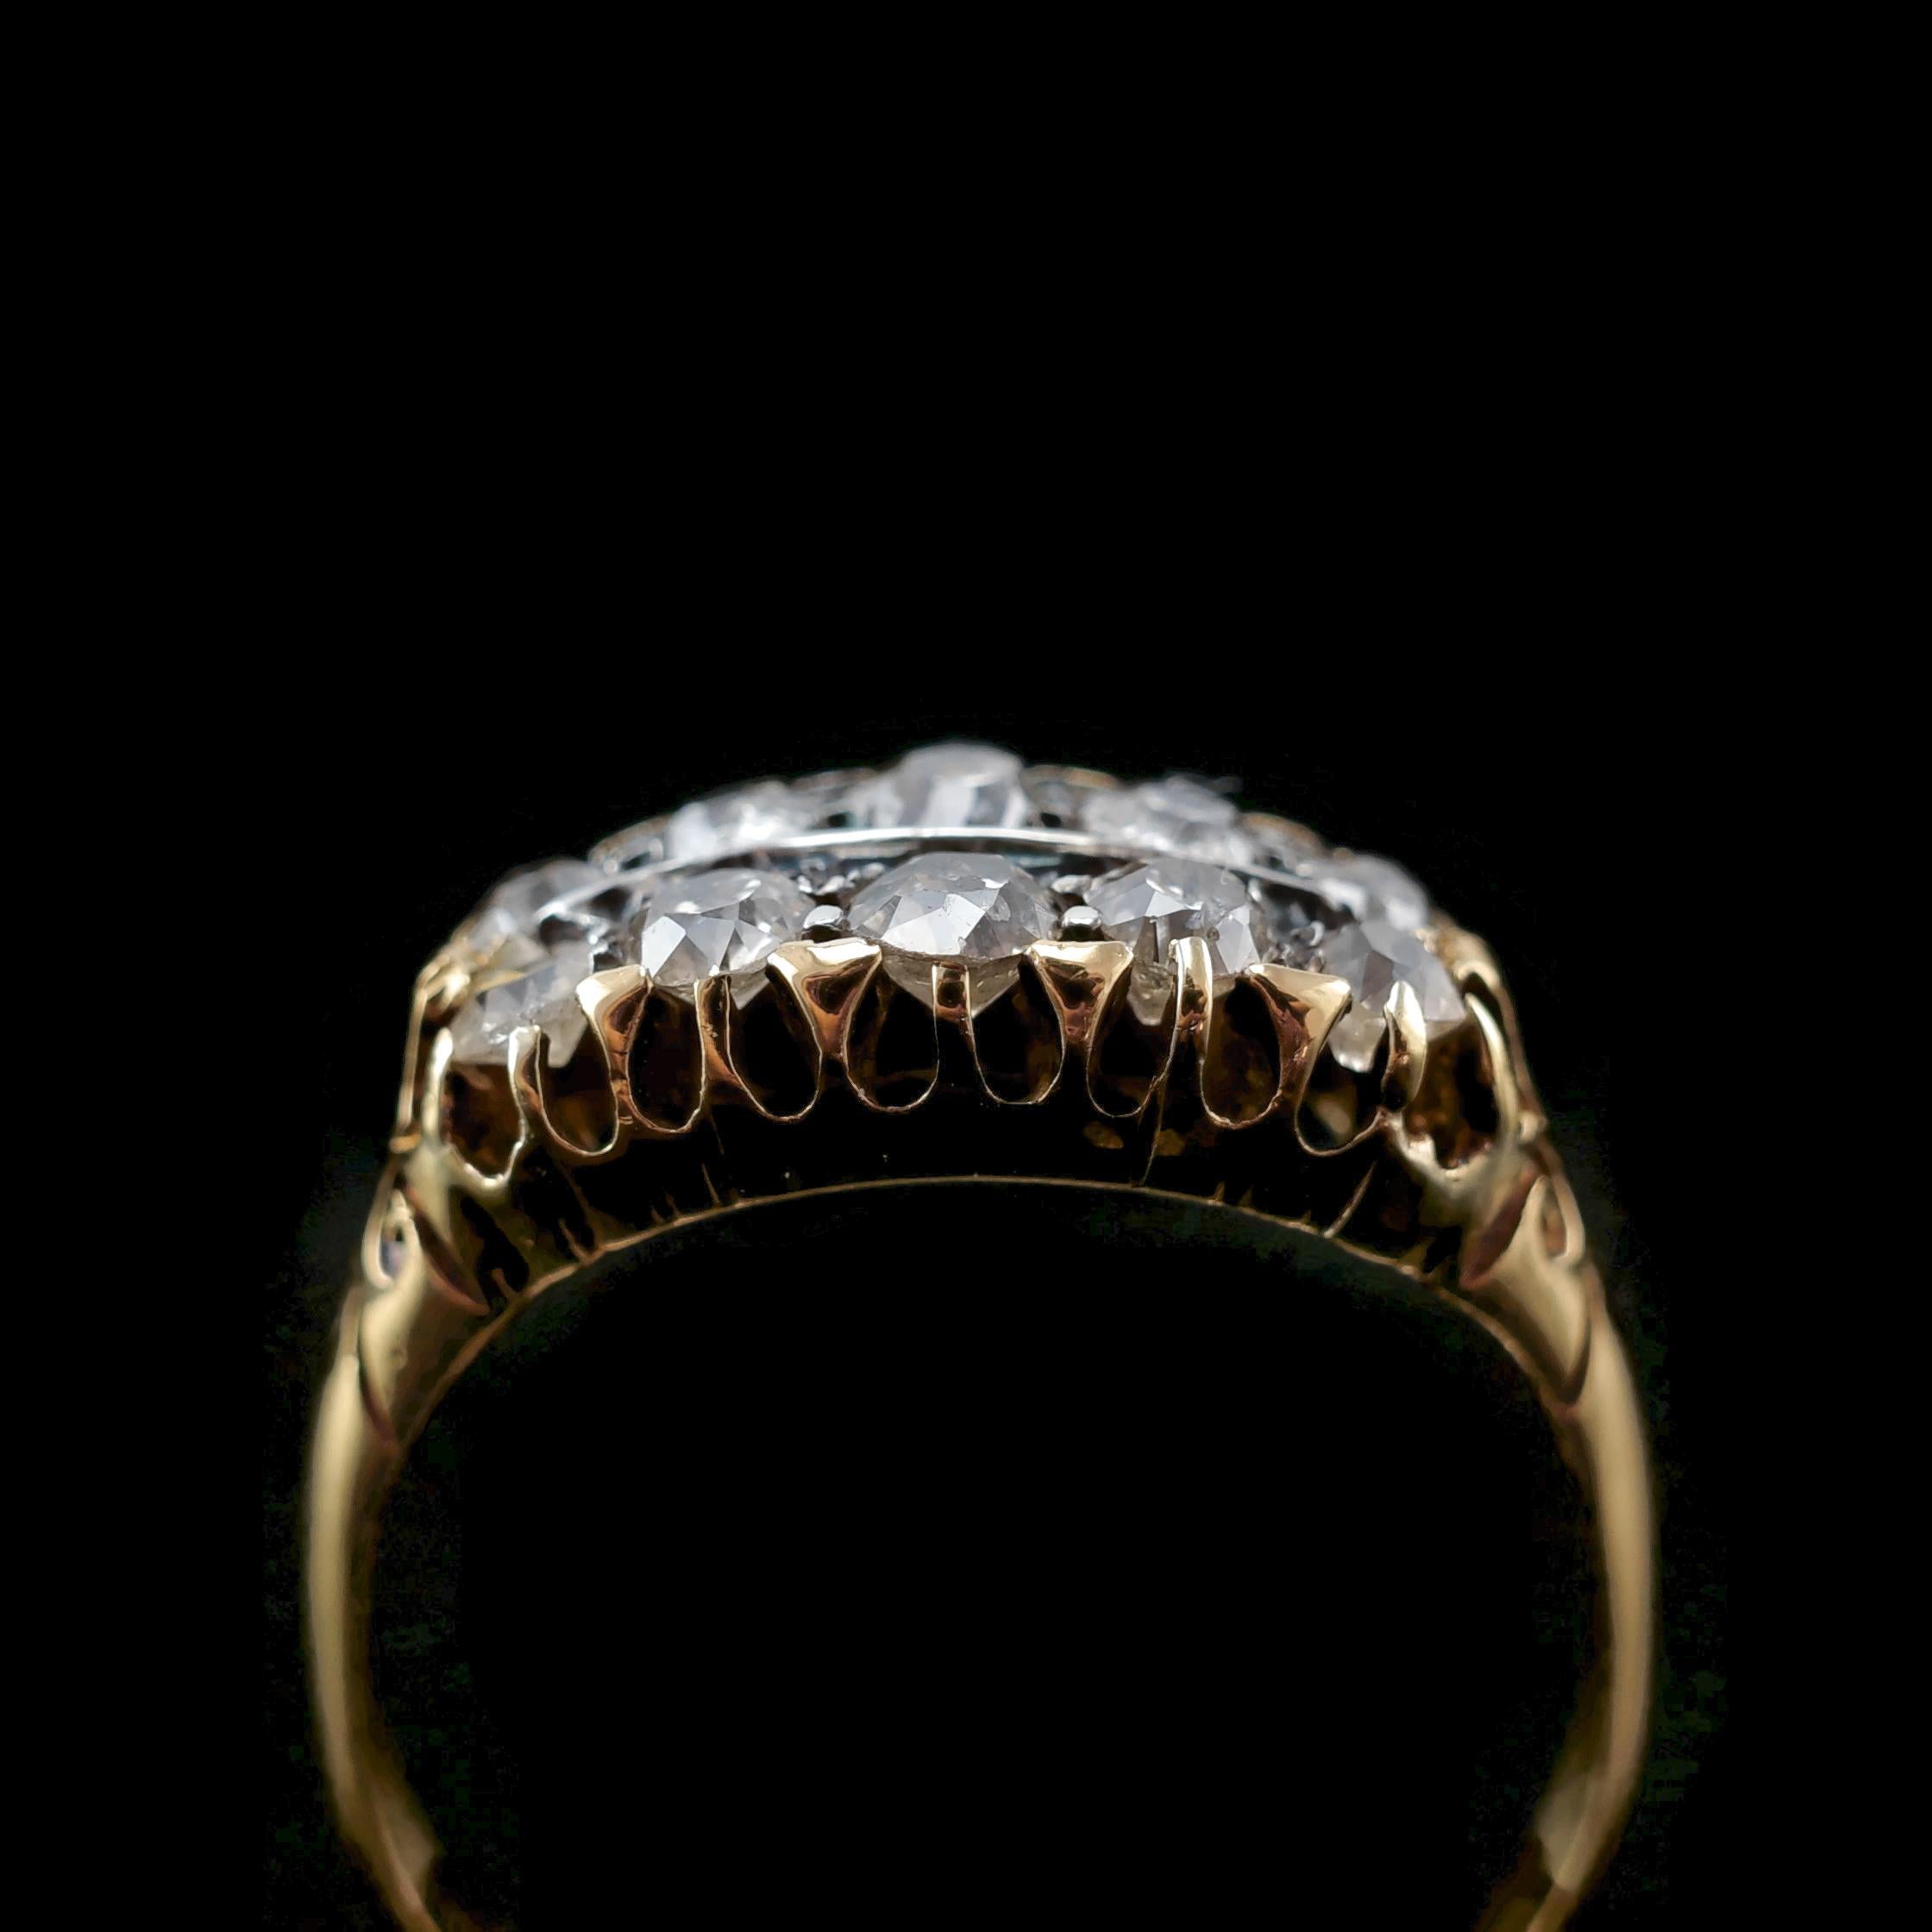 Antique Victorian 18K Gold Diamond Ring Old Cut Two Row Boat-Shaped, c.1890 For Sale 3